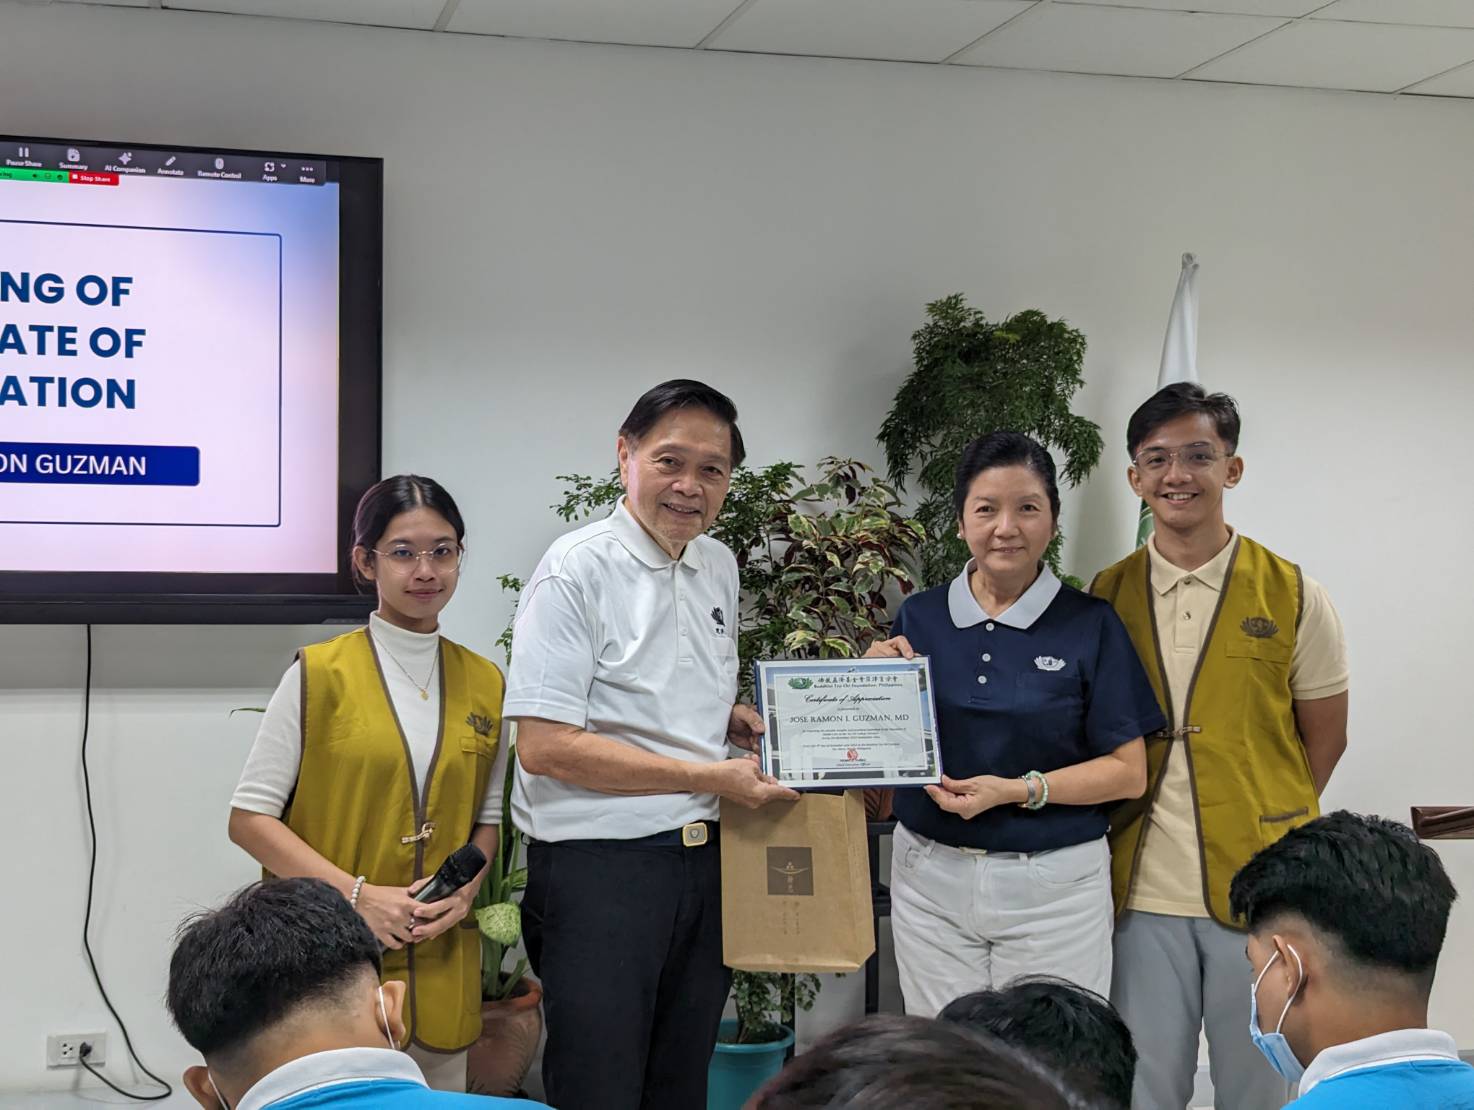  Humanity class speaker Dr. Jose Ramon L. Guzman (second from left) receives a certificate of appreciation from Tzu Chi Education Committee Head Rosa So (in blue) and Former Tzu Chi scholars Margo Ma-ang (first from left) and Jefferson Aguilar (first from right), who served as the event’s hosts.【Photo by Tina Pasion】